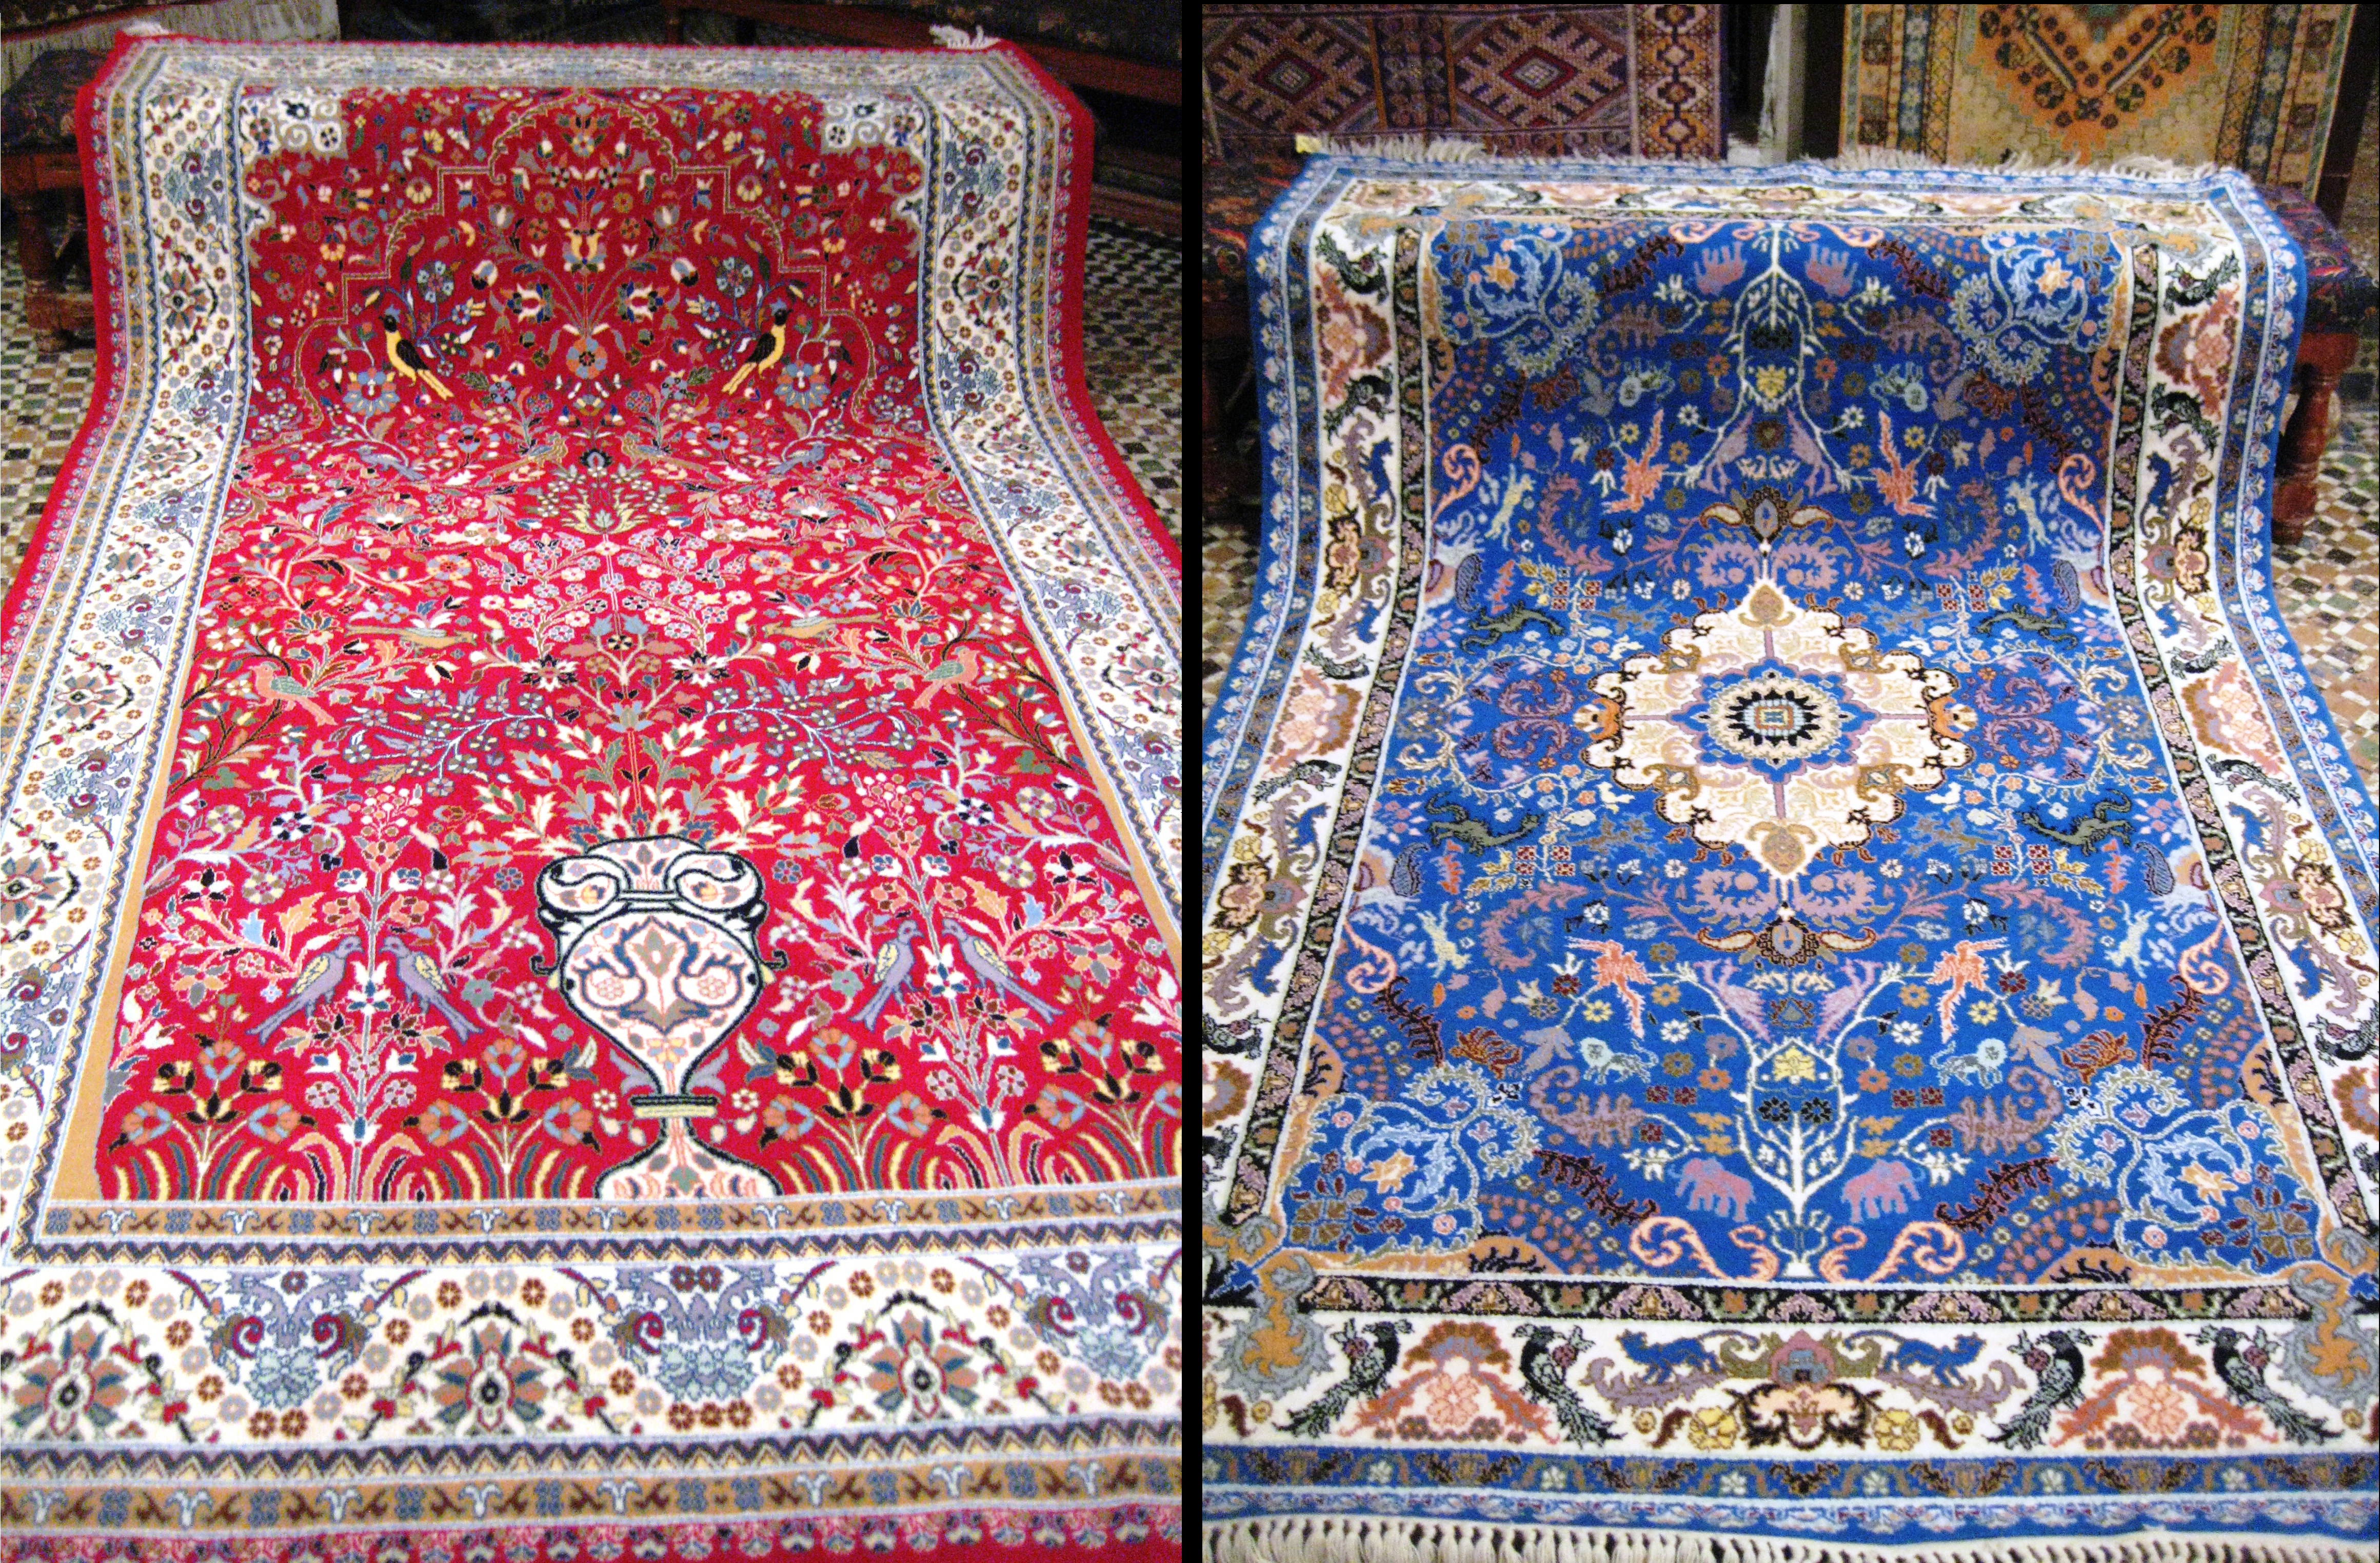 the Moroccan carpets we almost bought UUQYMQI